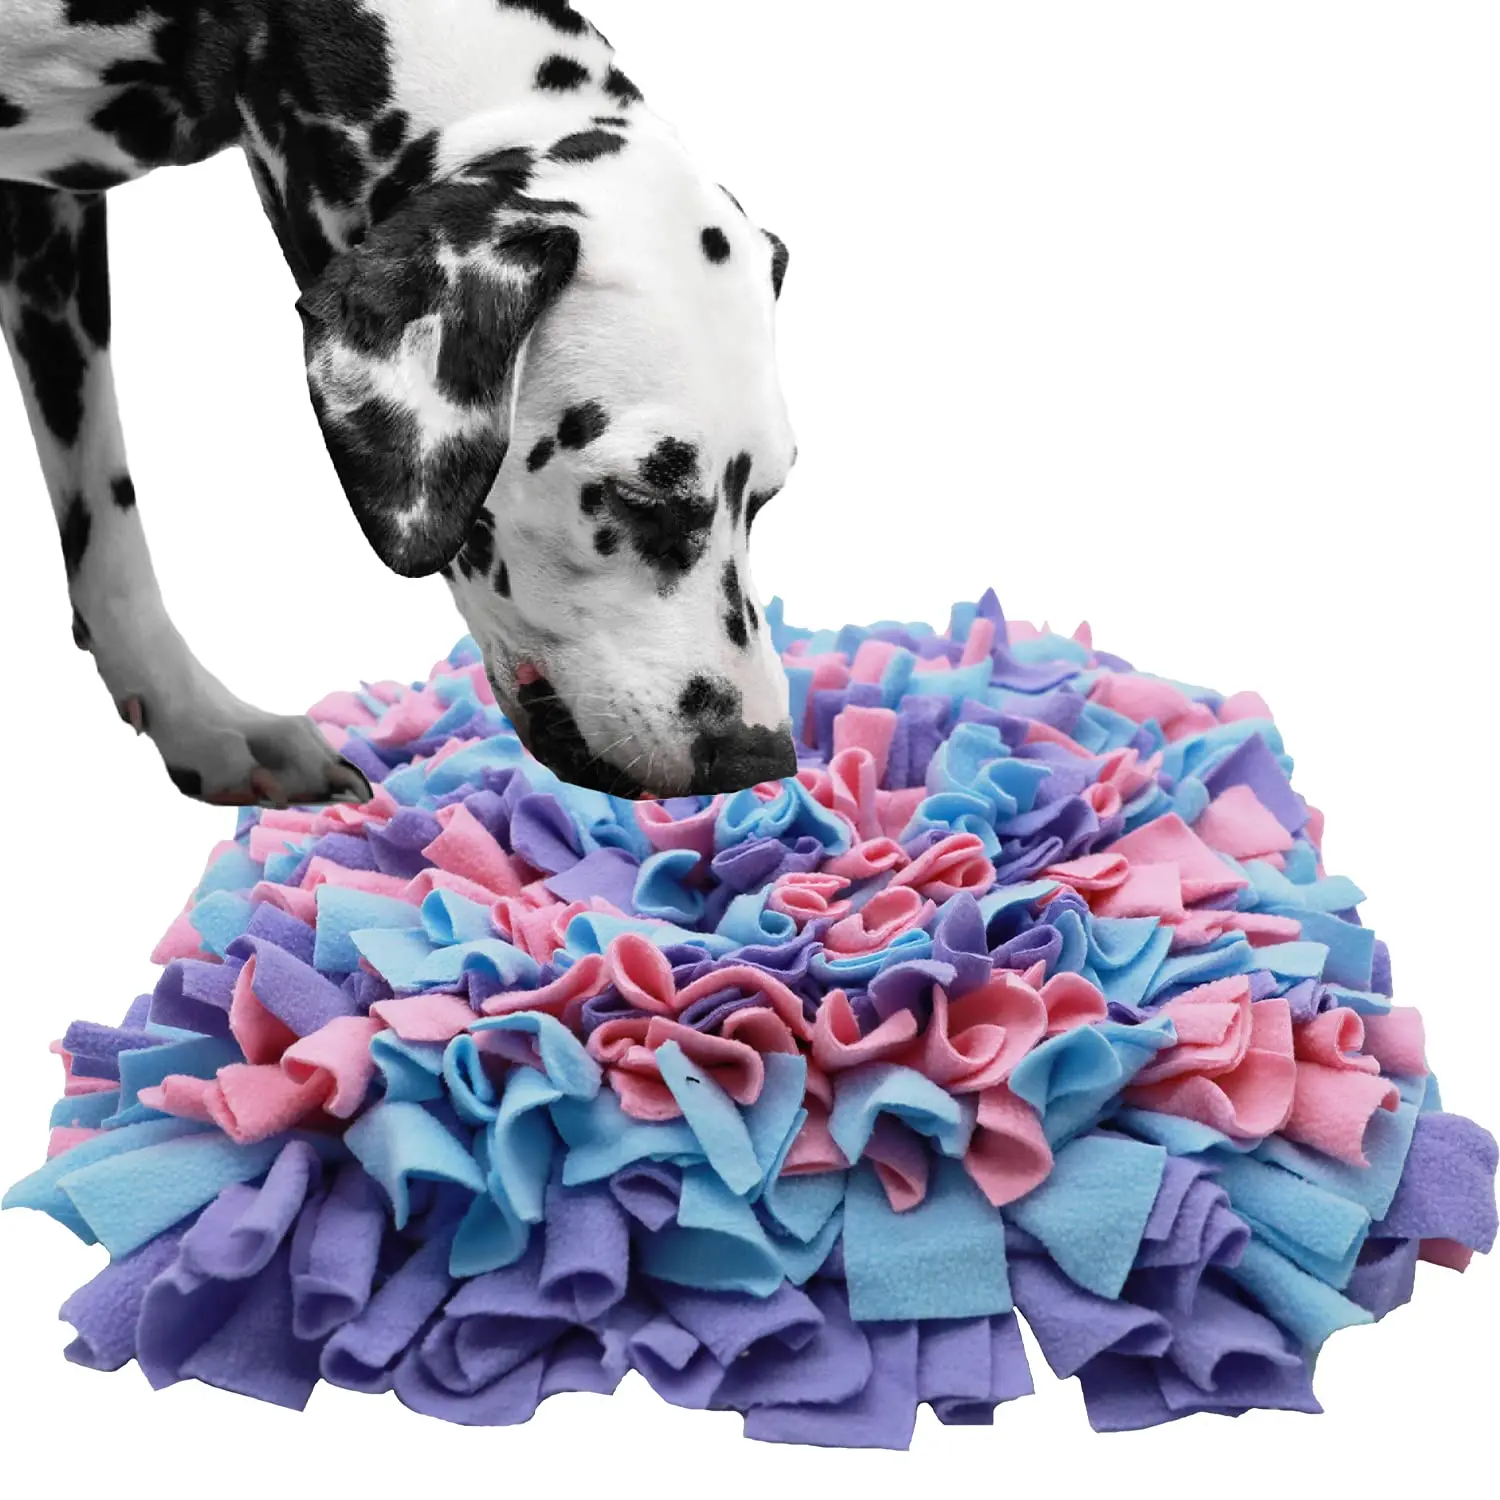 Washable Snuffle Mat for Dog, Sniffing Pad, Puzzle Toy, Slow Feeding Bowl,  Food Feeding, Small, Medium Nose Smell Training - AliExpress